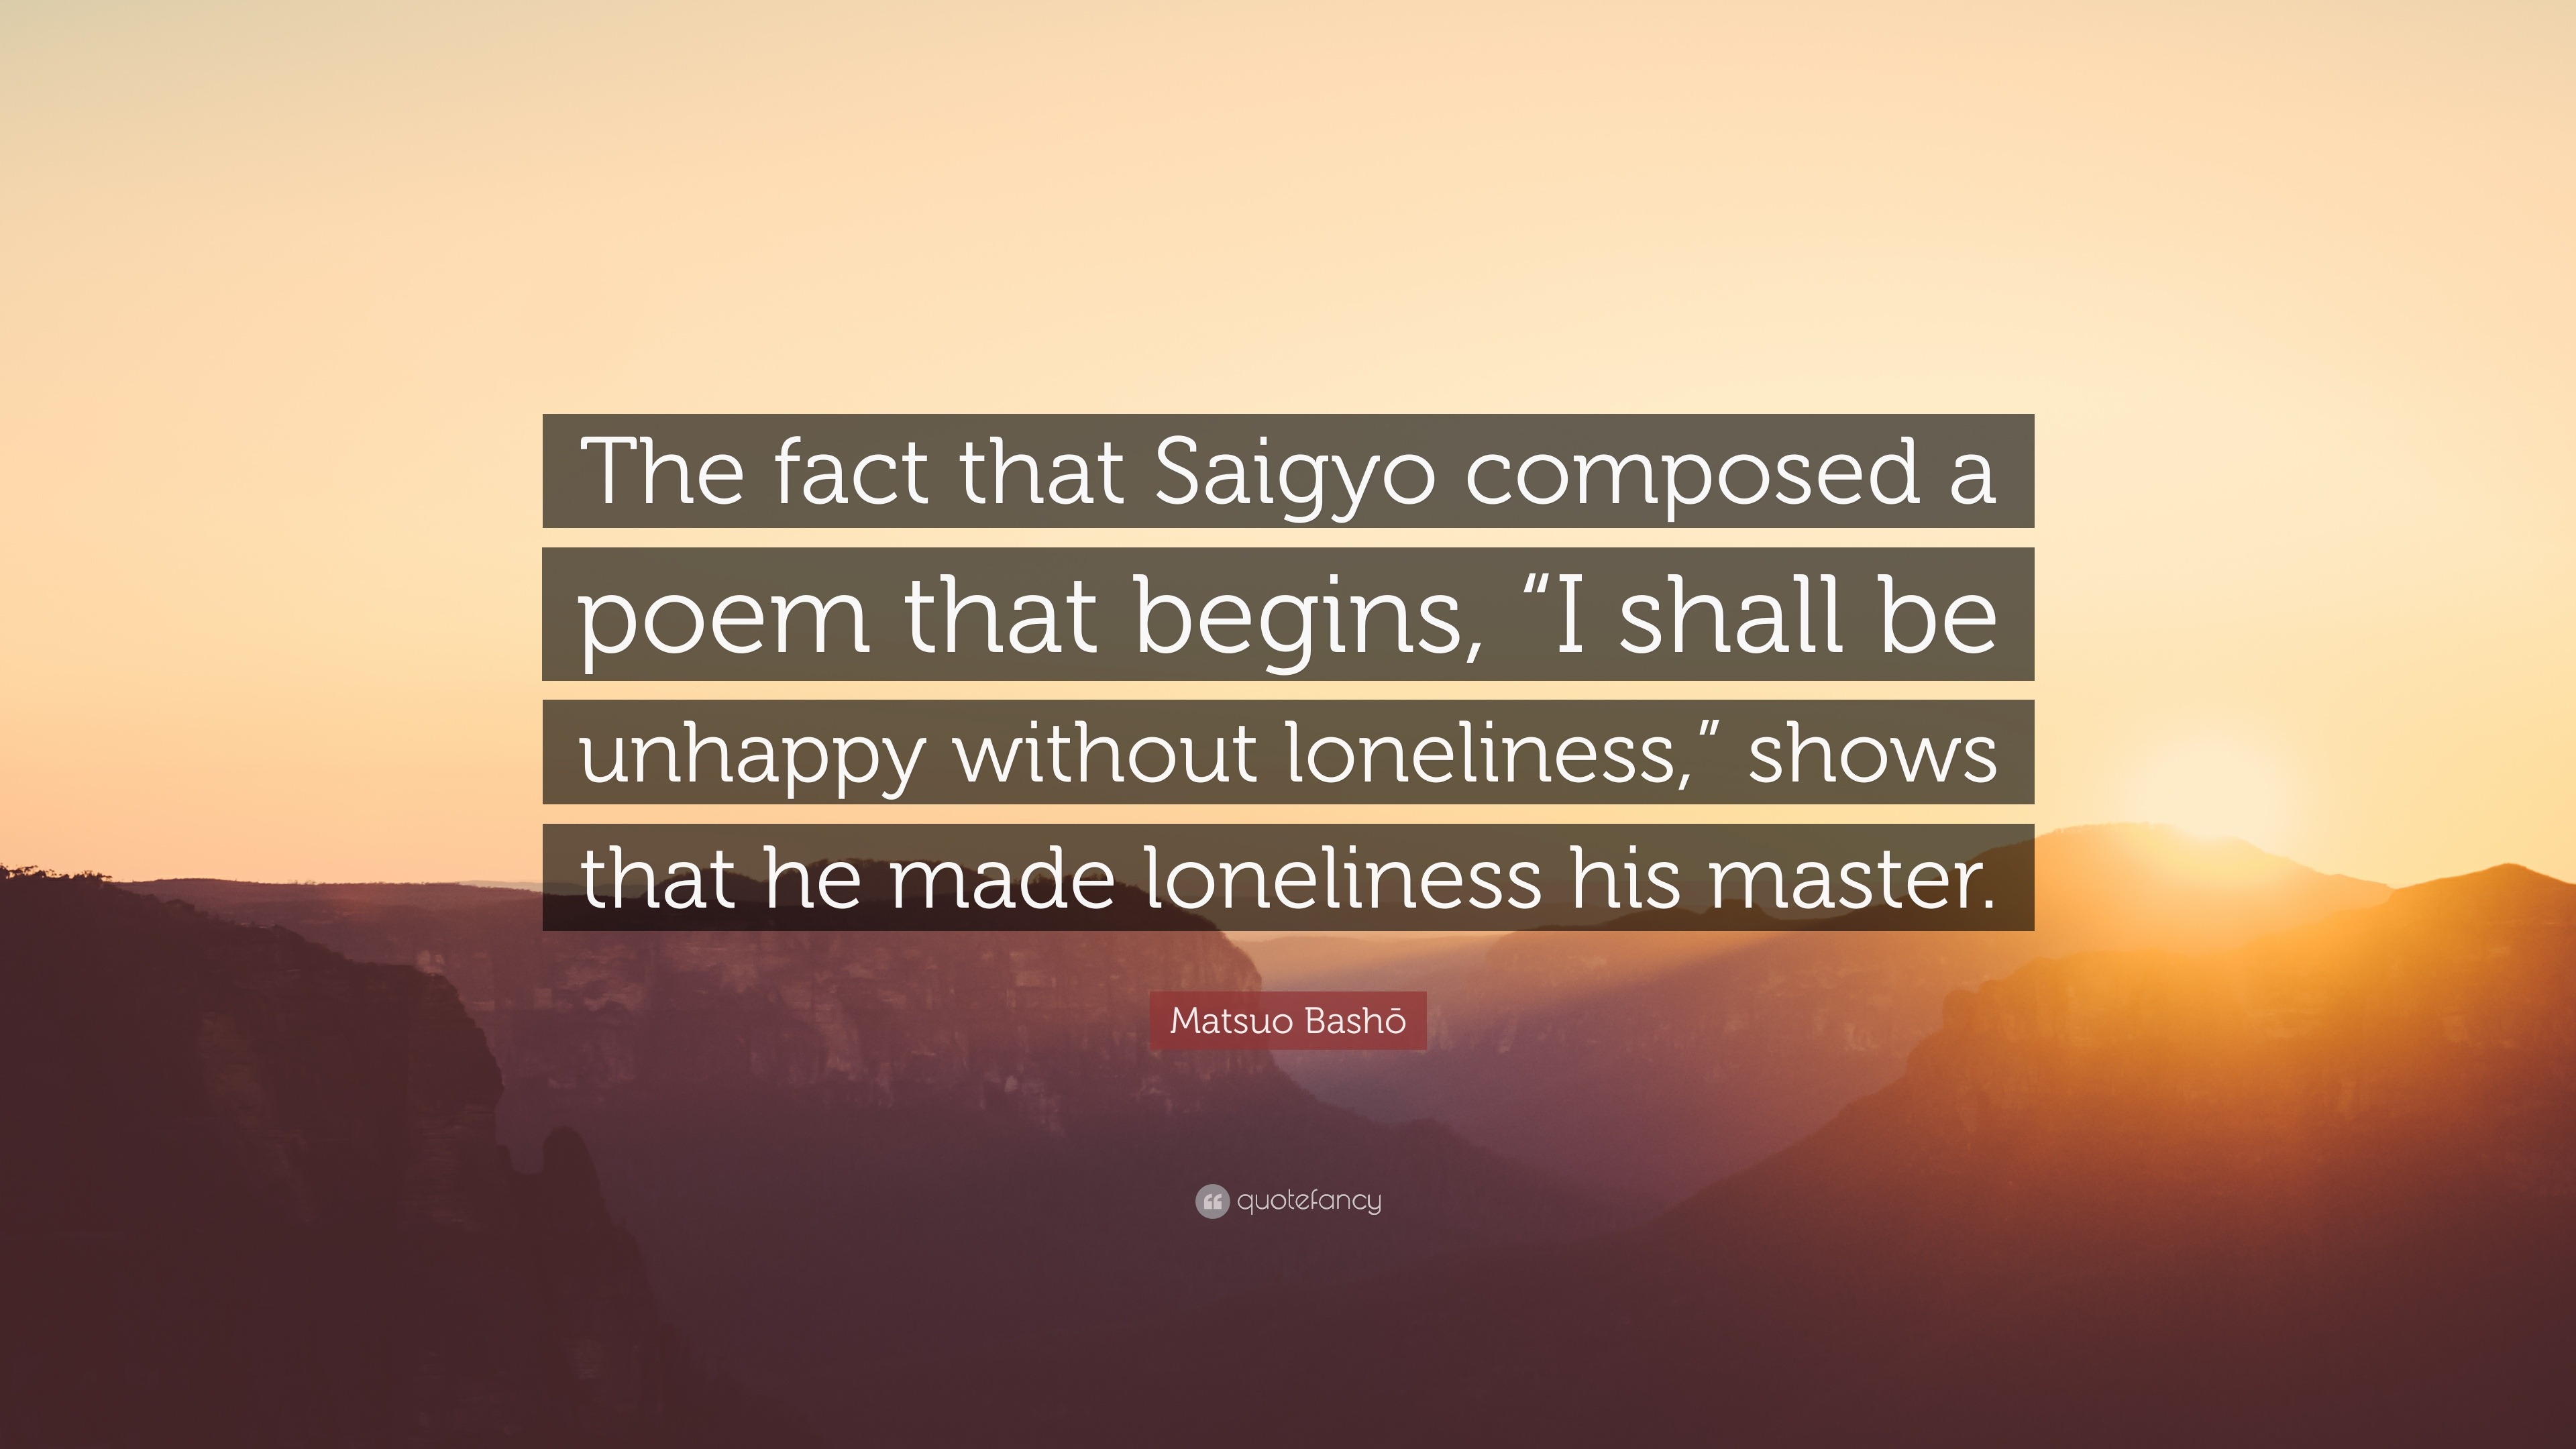 Matsuo Bashō Quote The Fact That Saigyo Composed A Poem That Begins I Shall Be Unhappy Without Loneliness Shows That He Made Loneliness